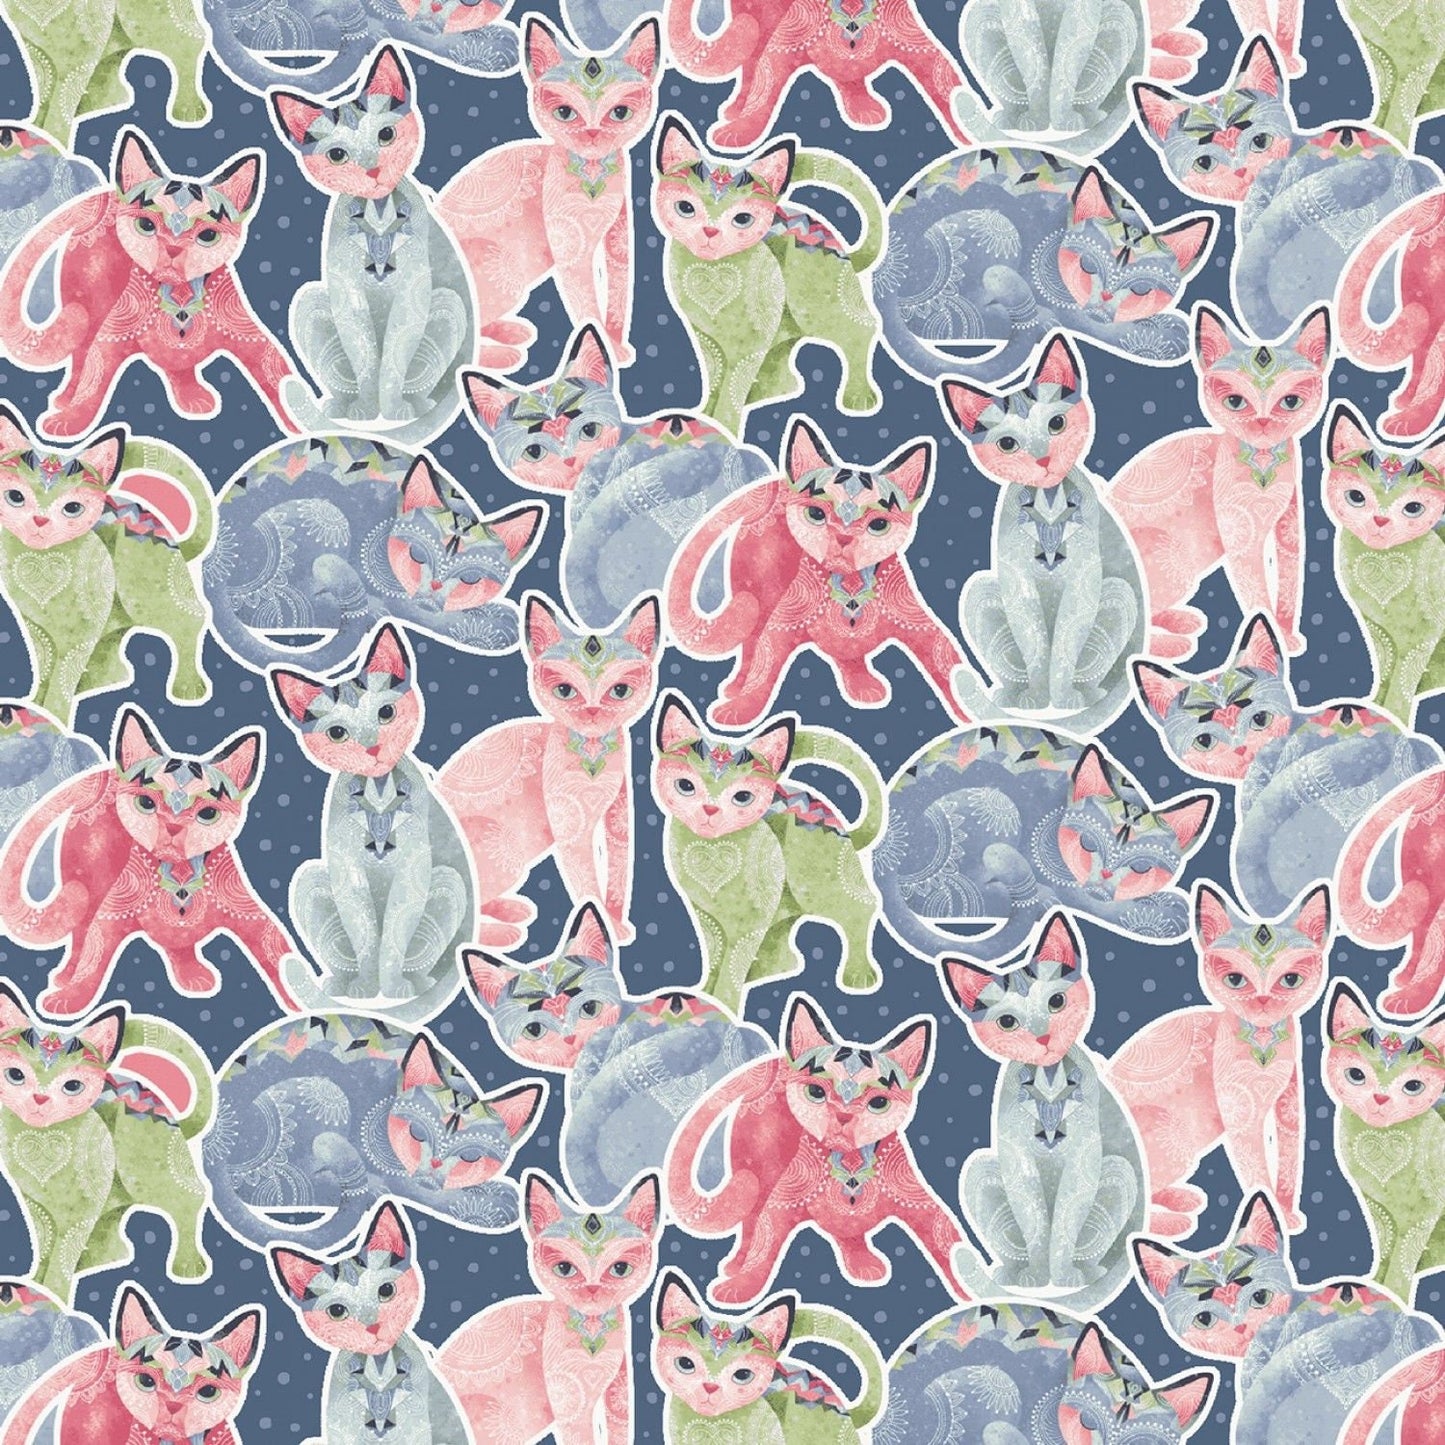 Fancy Cats by Nancy Archer Packed Cats 5293S-72 Cotton Woven Fabric